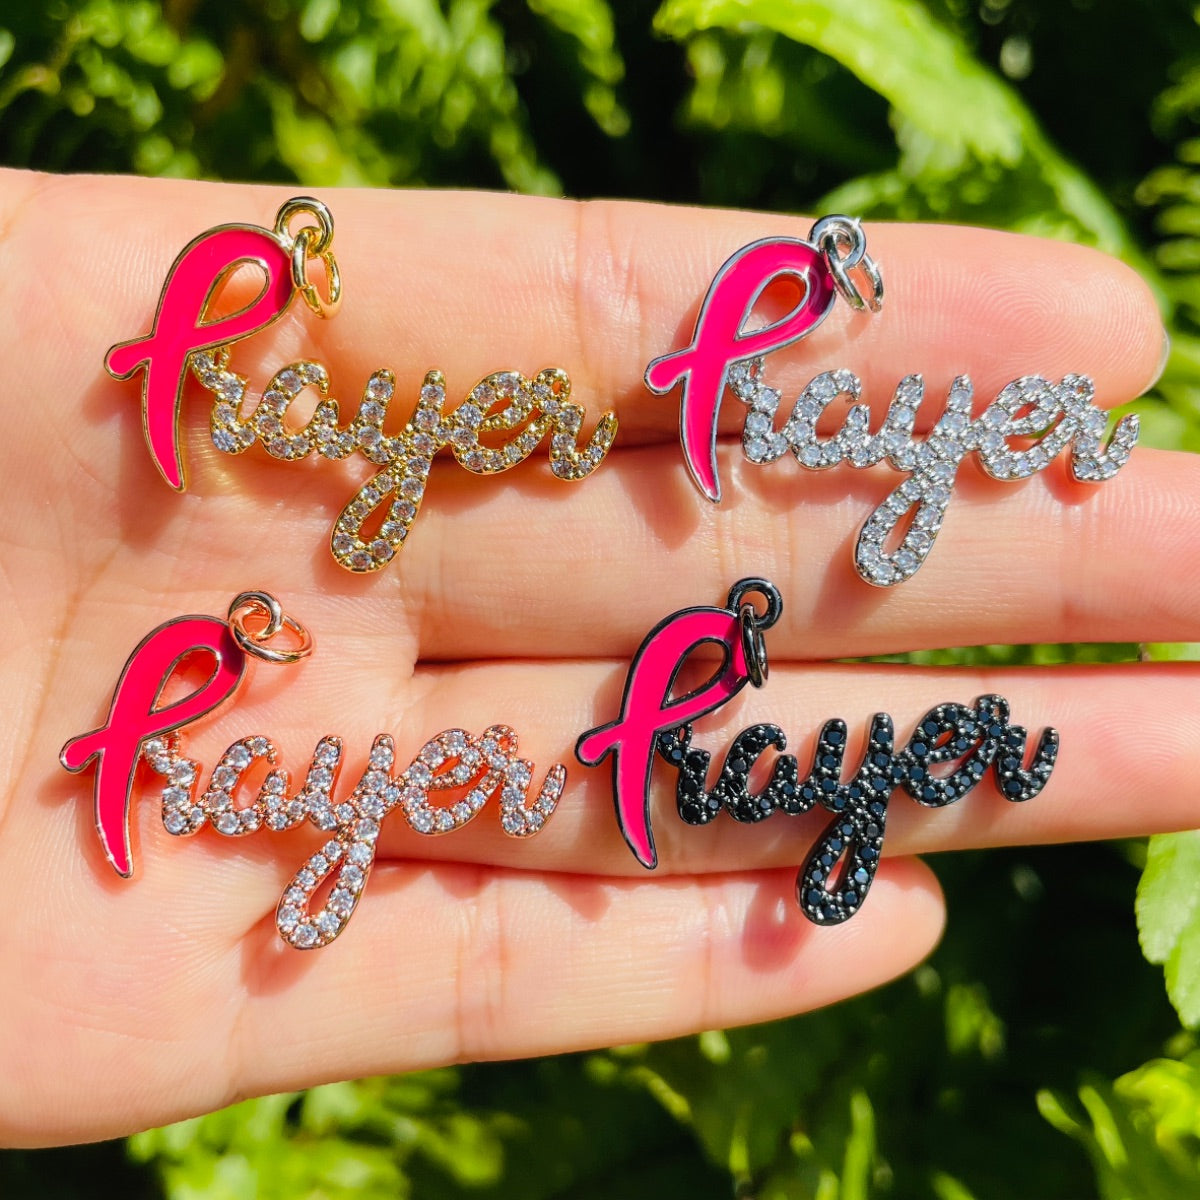 10pcs/lot CZ Paved Pink Ribbon Prayer Charms - Breast Cancer Awareness Mix Colors CZ Paved Charms Breast Cancer Awareness Charms Beads Beyond